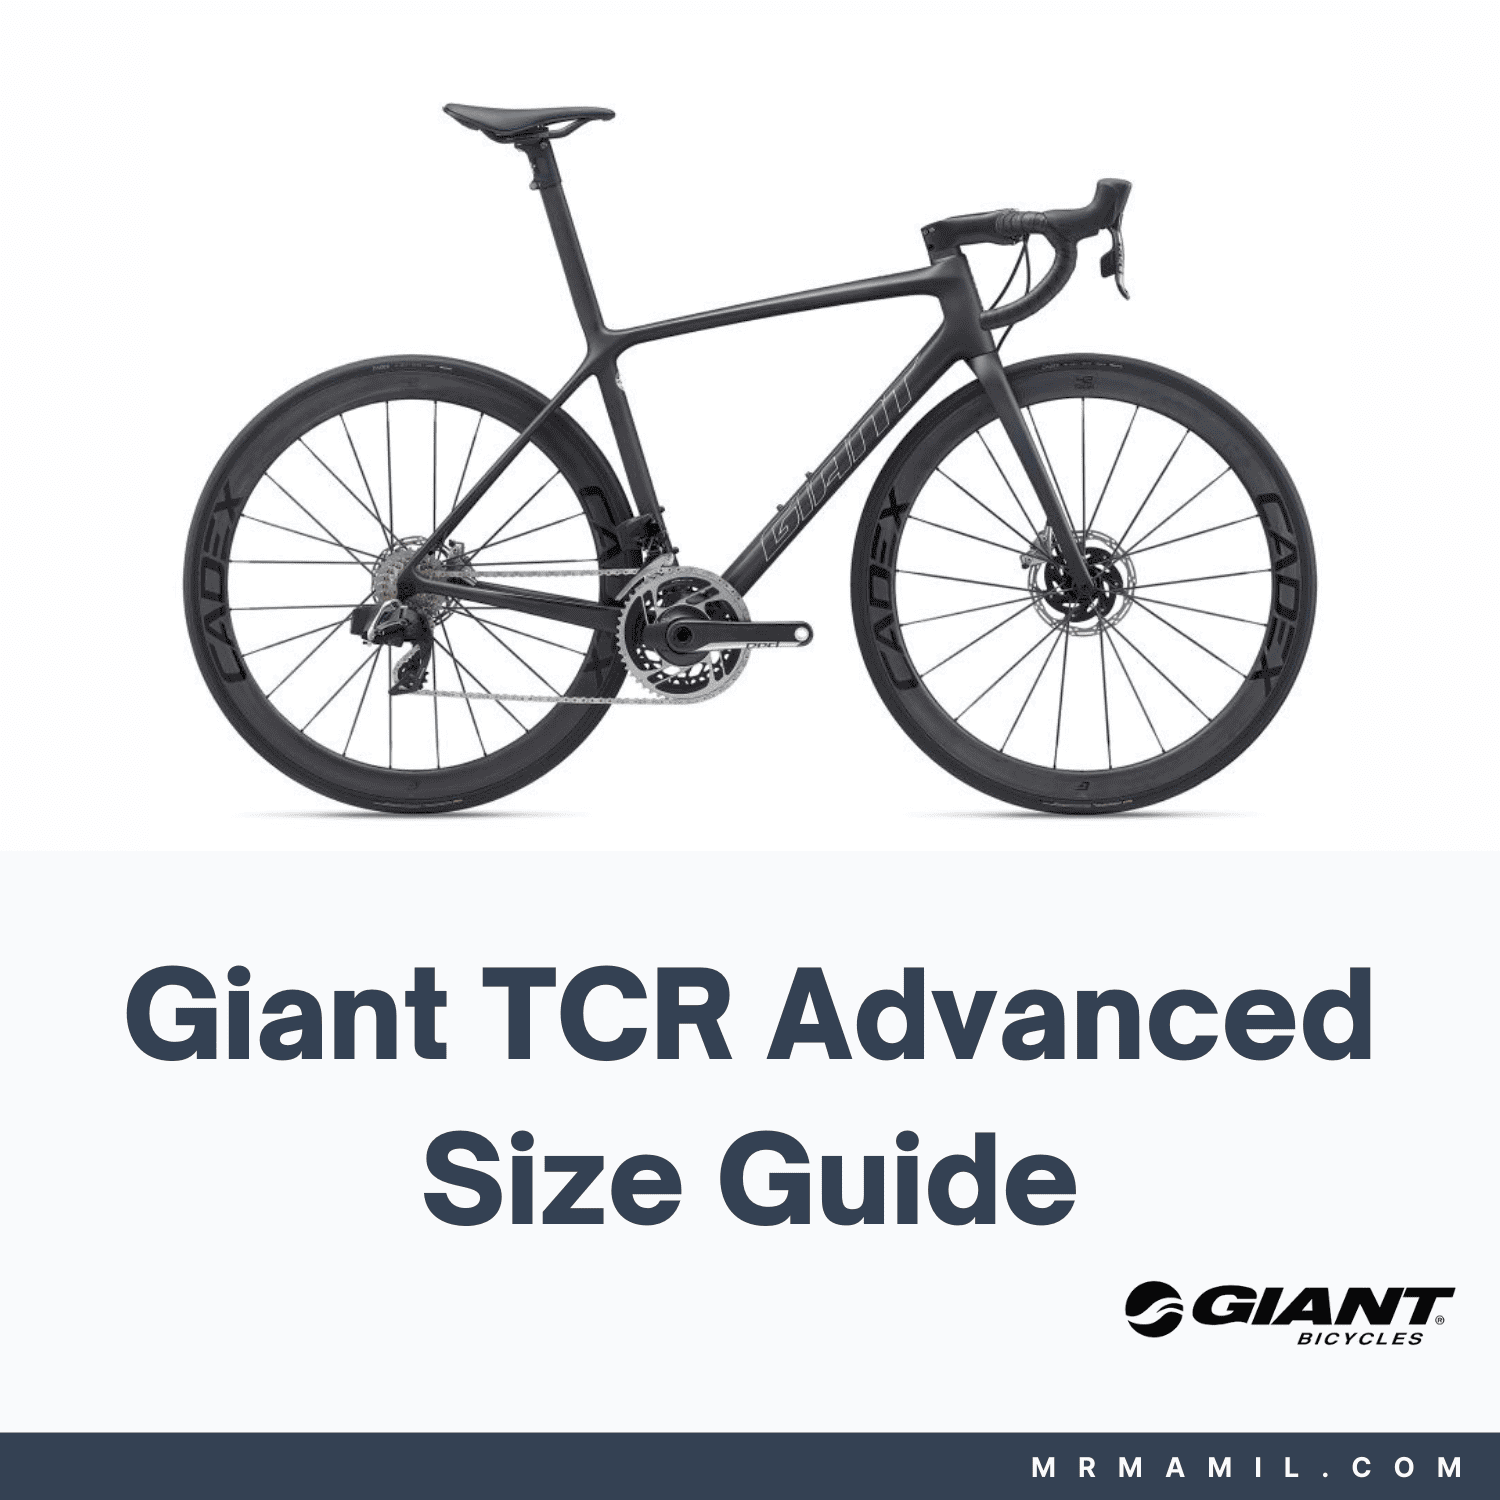 Giant TCR Advanced Size Guide